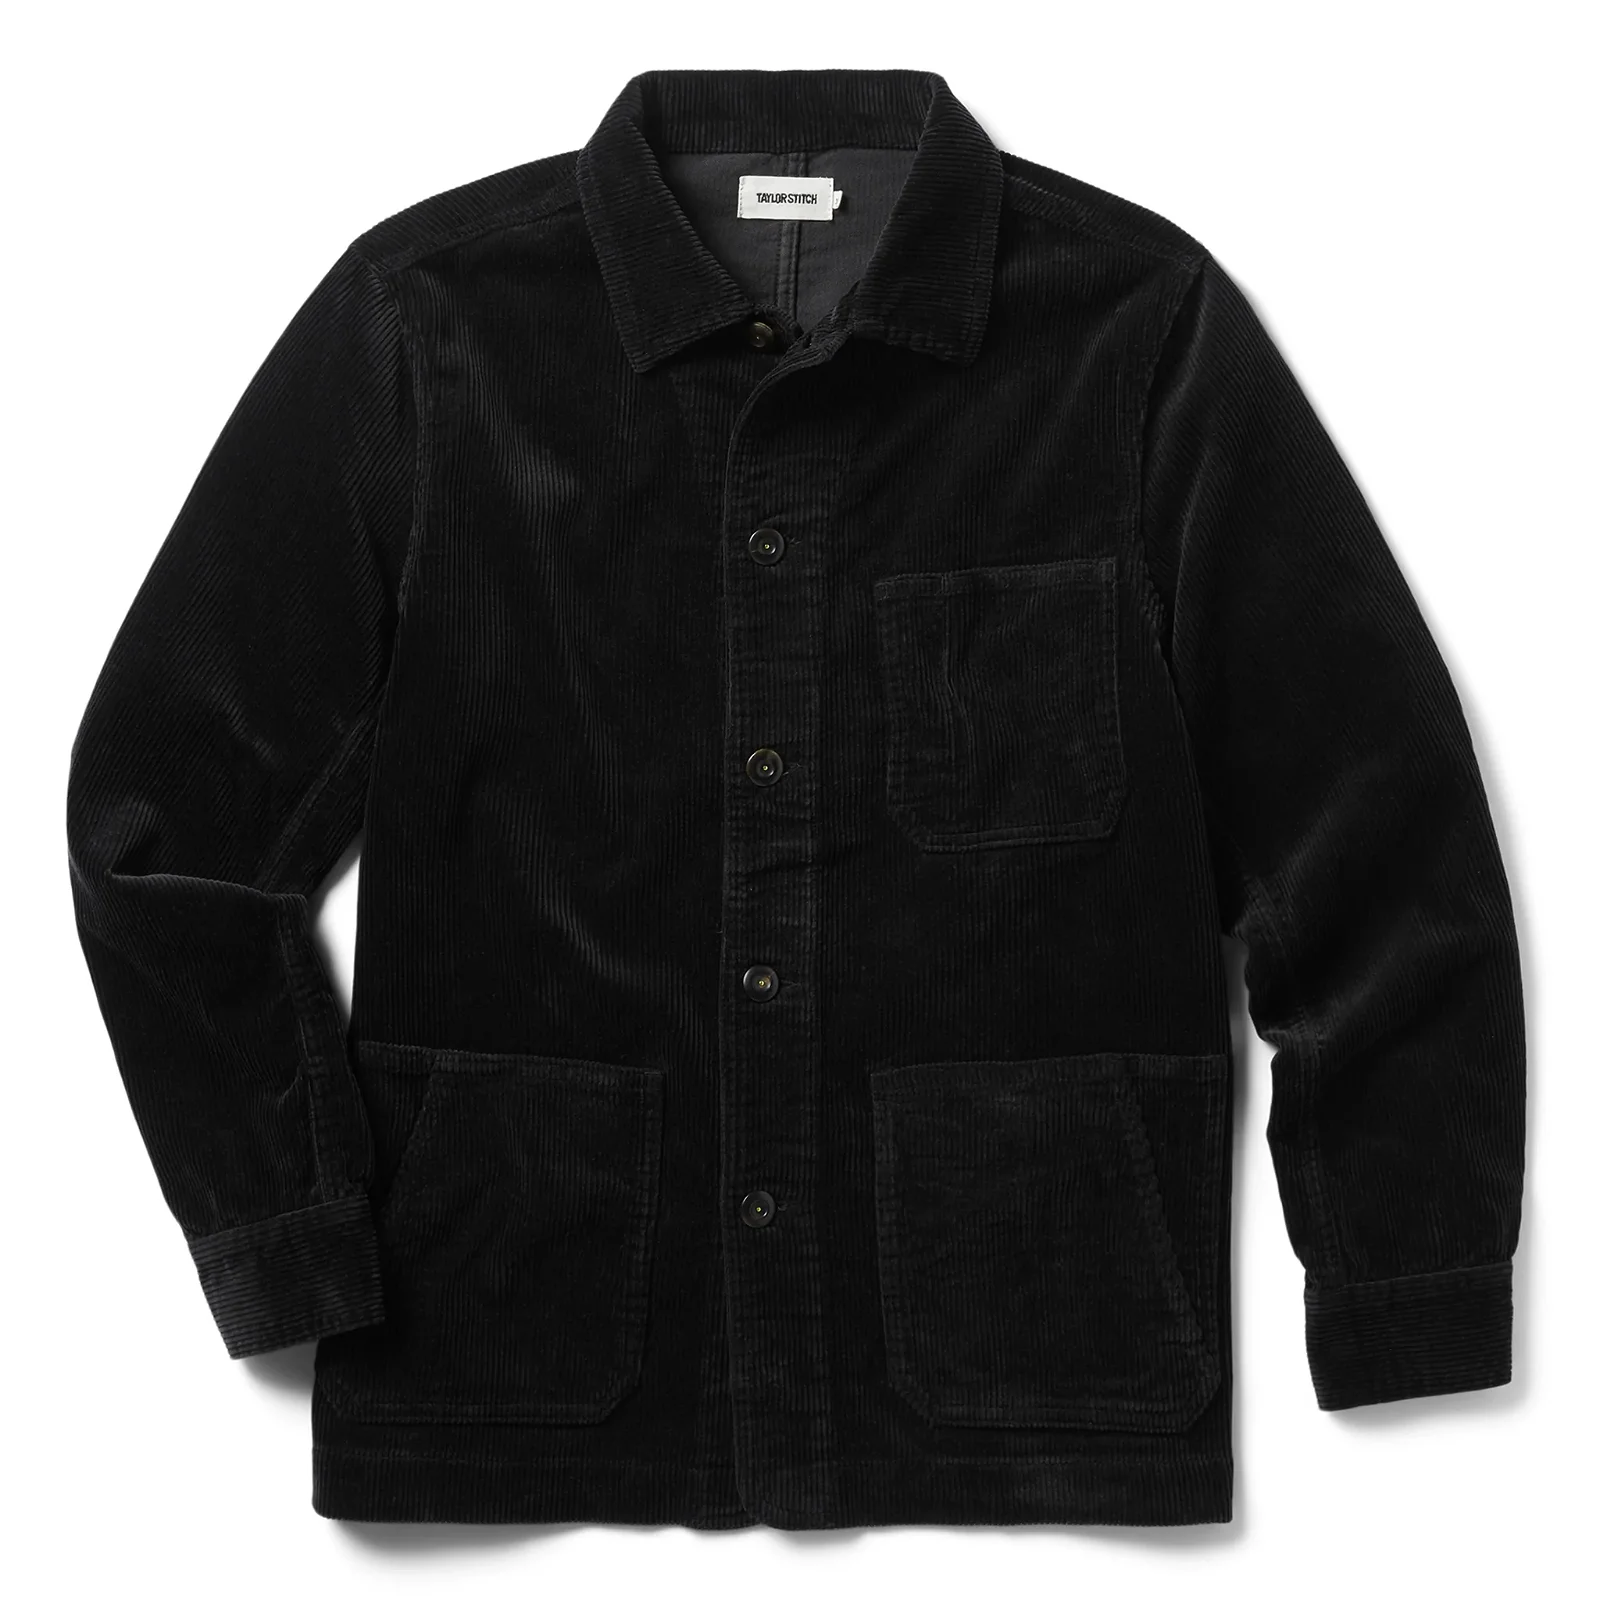 Image of The Ojai Jacket in Coal Cord